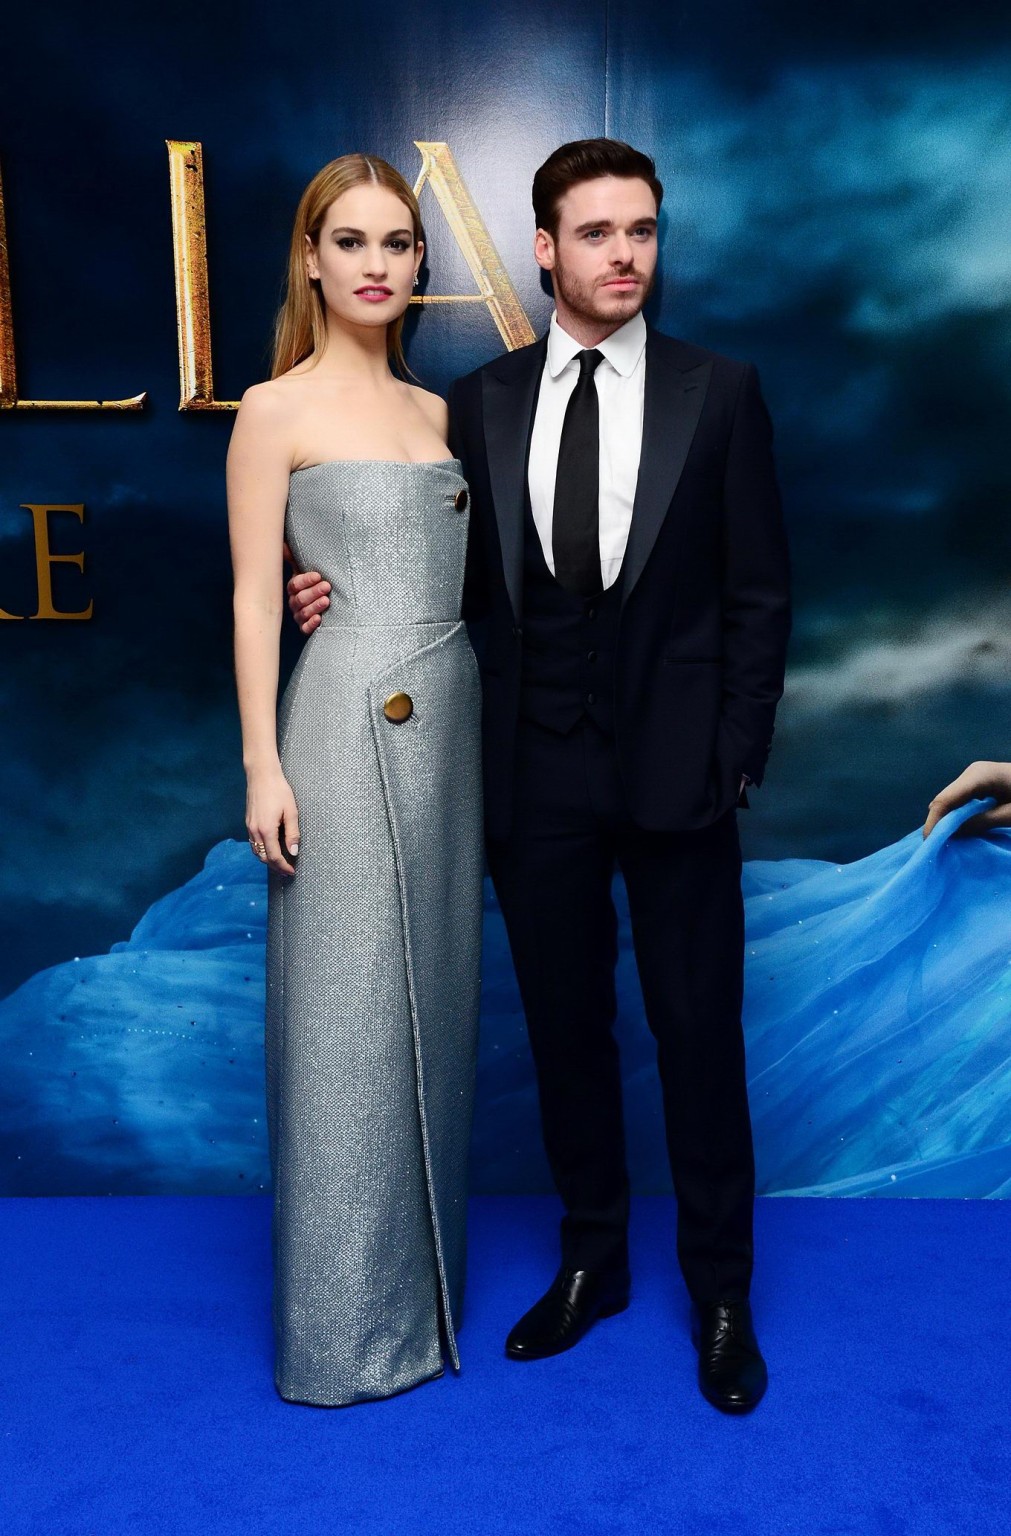 Lily James busty wearing a strapless dress at Disneys Cinderella premiere in Lon #75169725